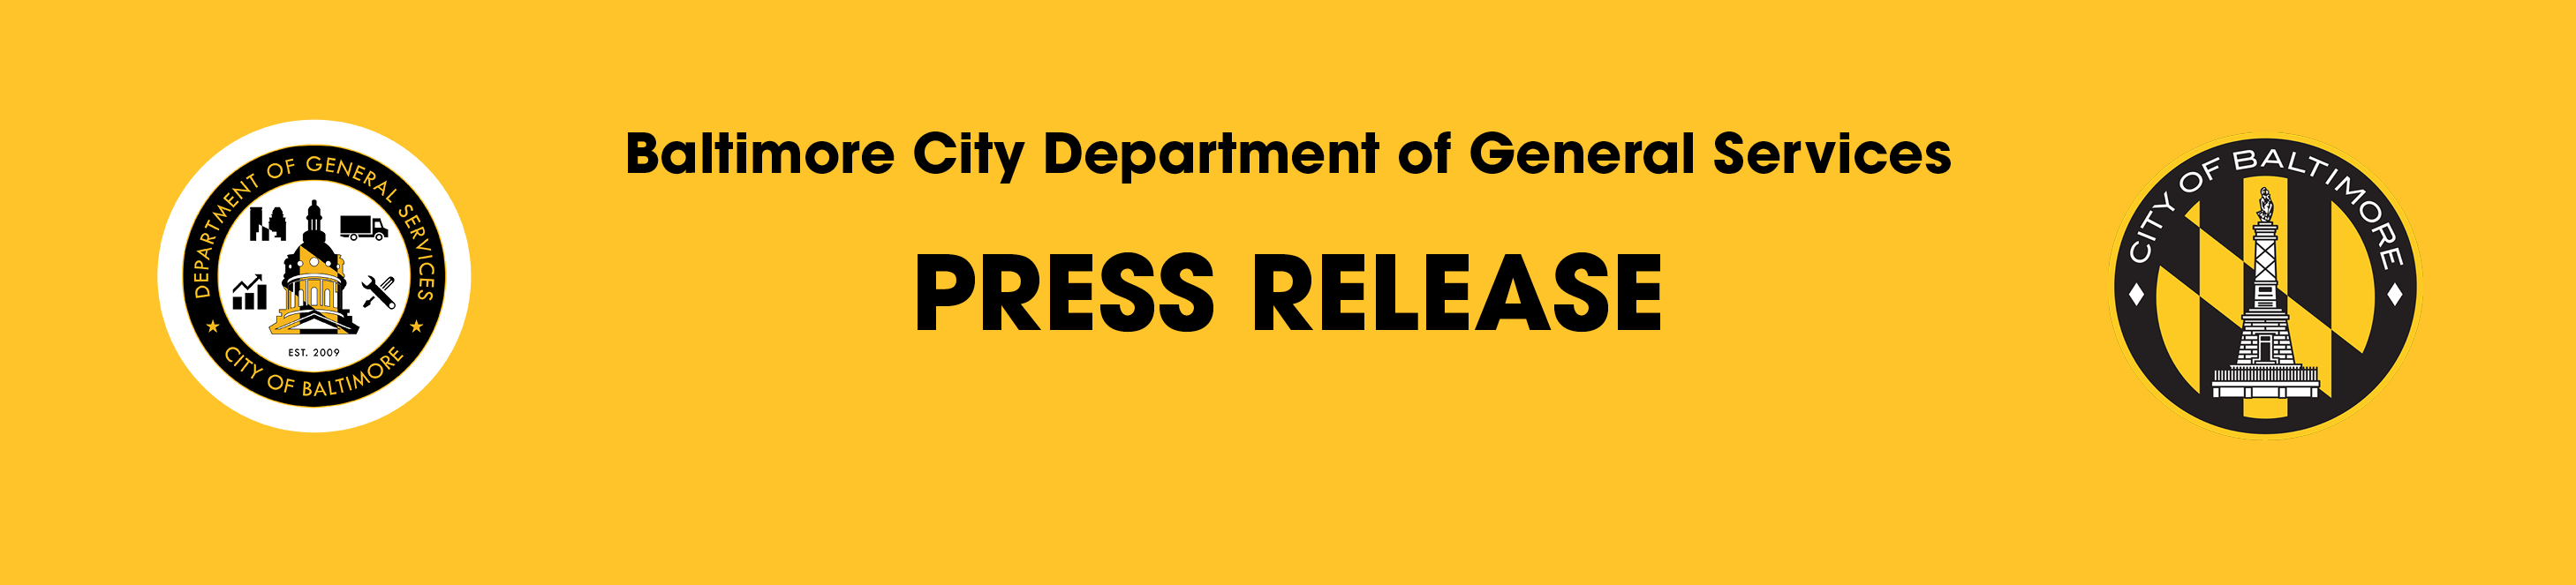 Department of General Service Press Release Banner Graphic